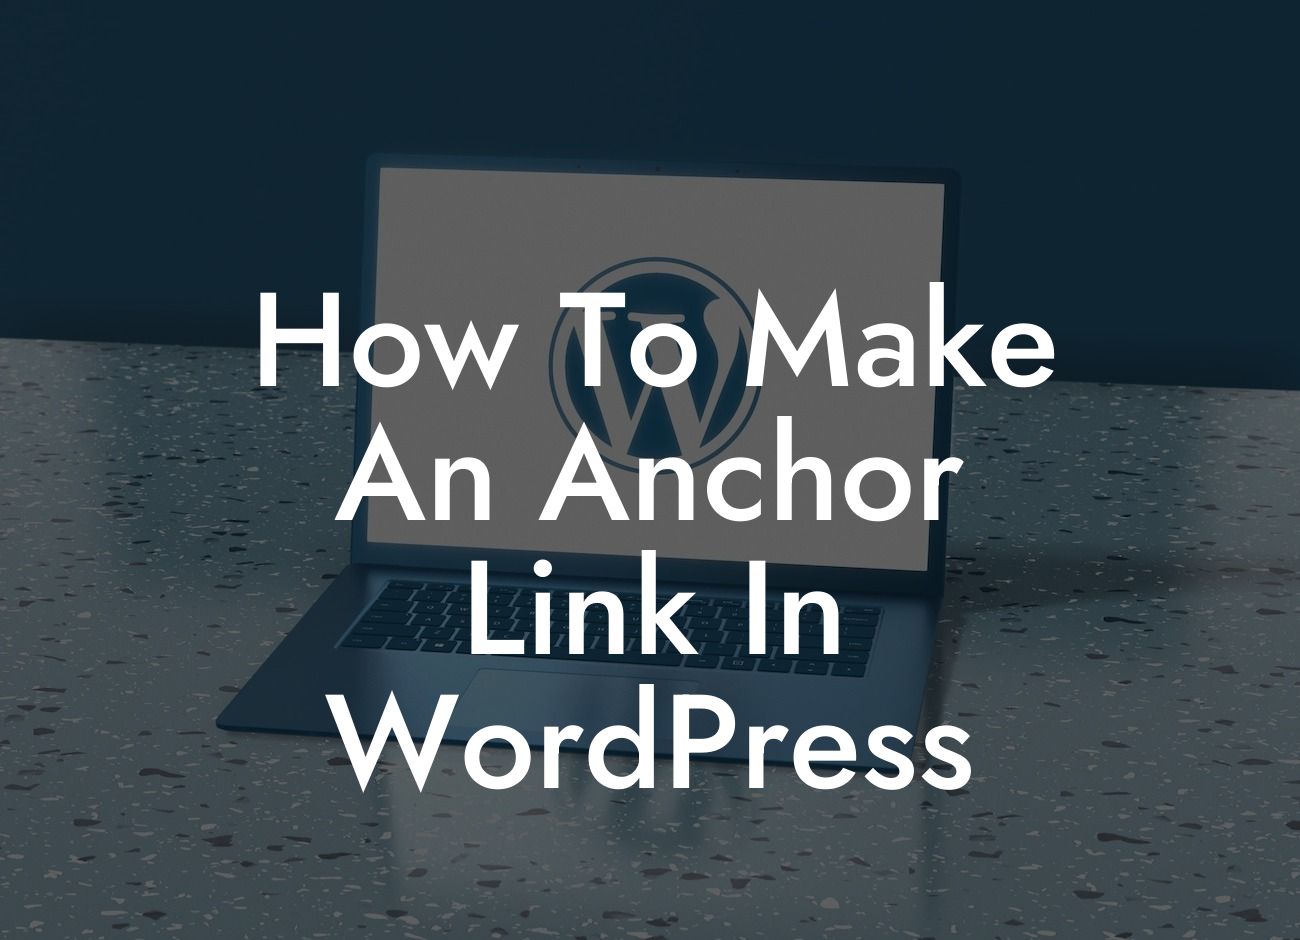 How To Make An Anchor Link In WordPress